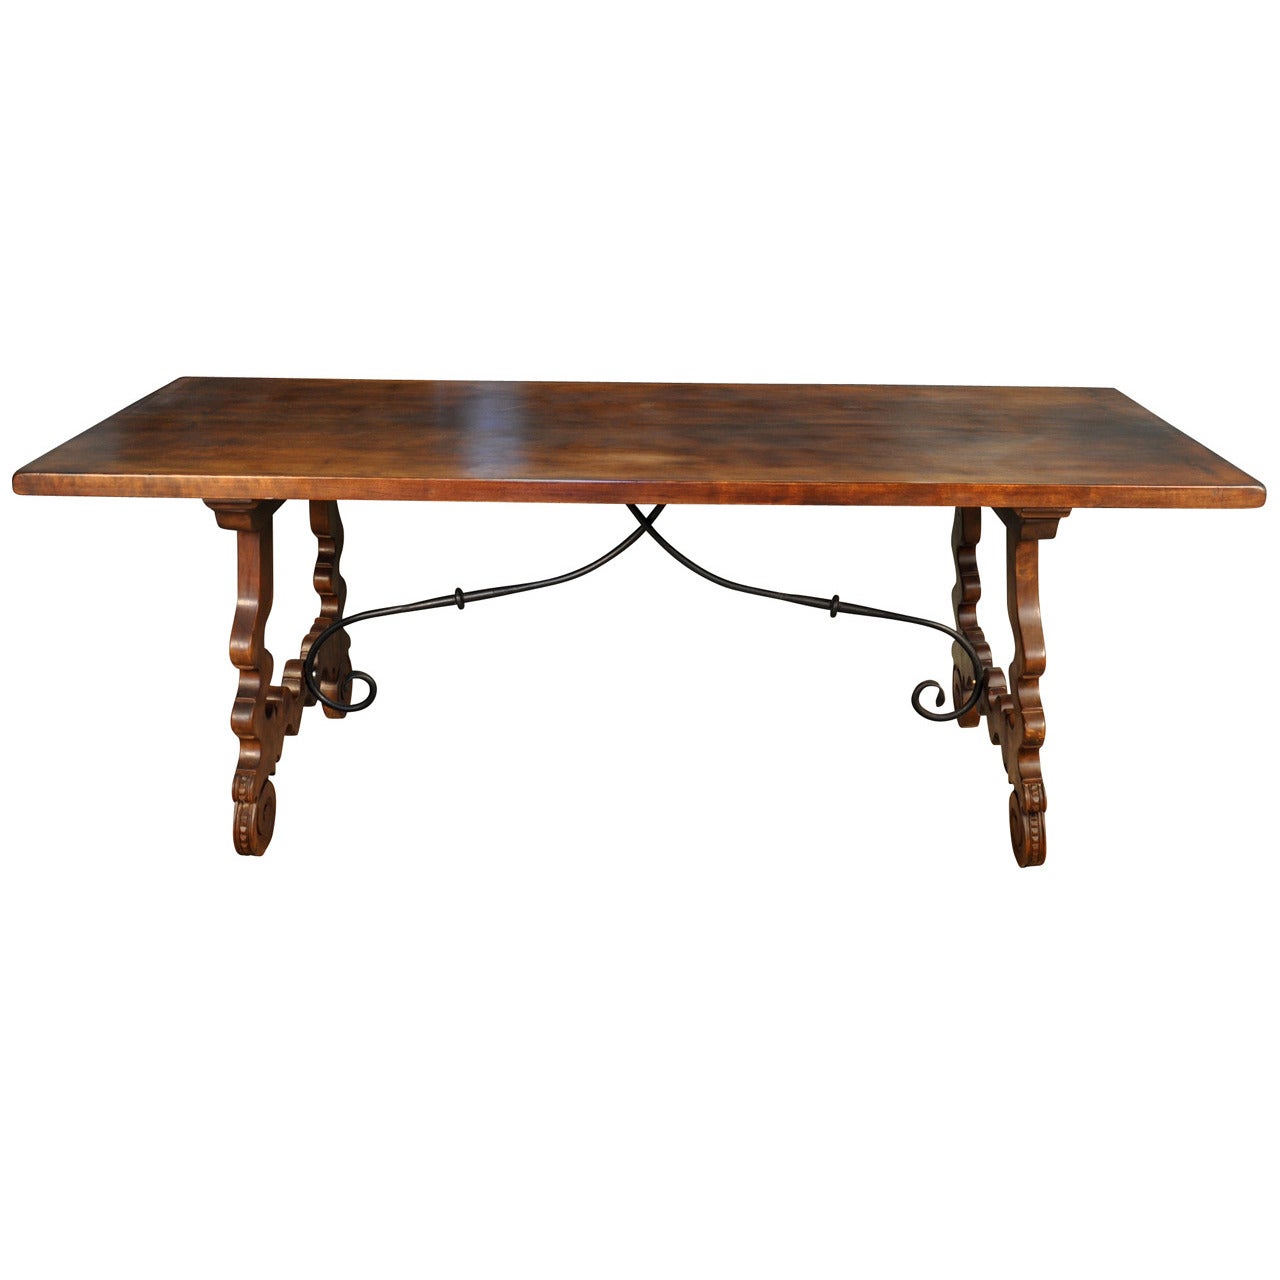 Early 20th Century Spanish Farm Table or Trestle Table in Walnut